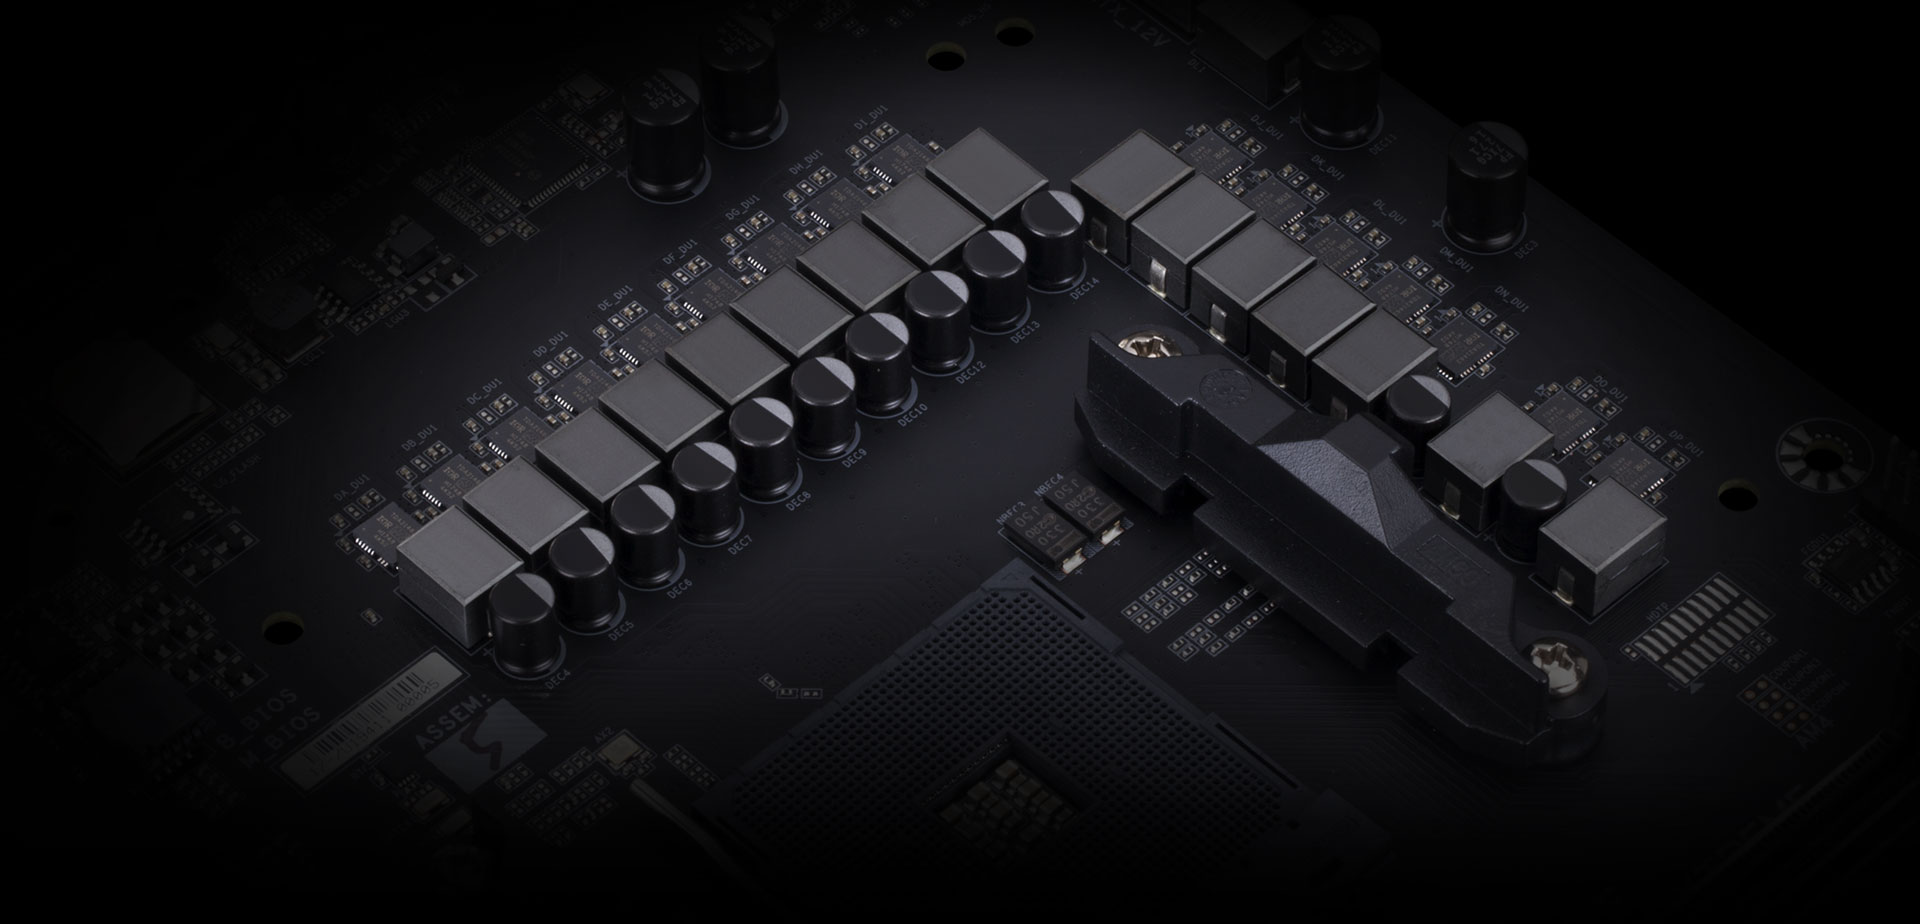 Amid The Hype, Does PCIe Gen4 Really Make A Difference To Your Gaming Experience?